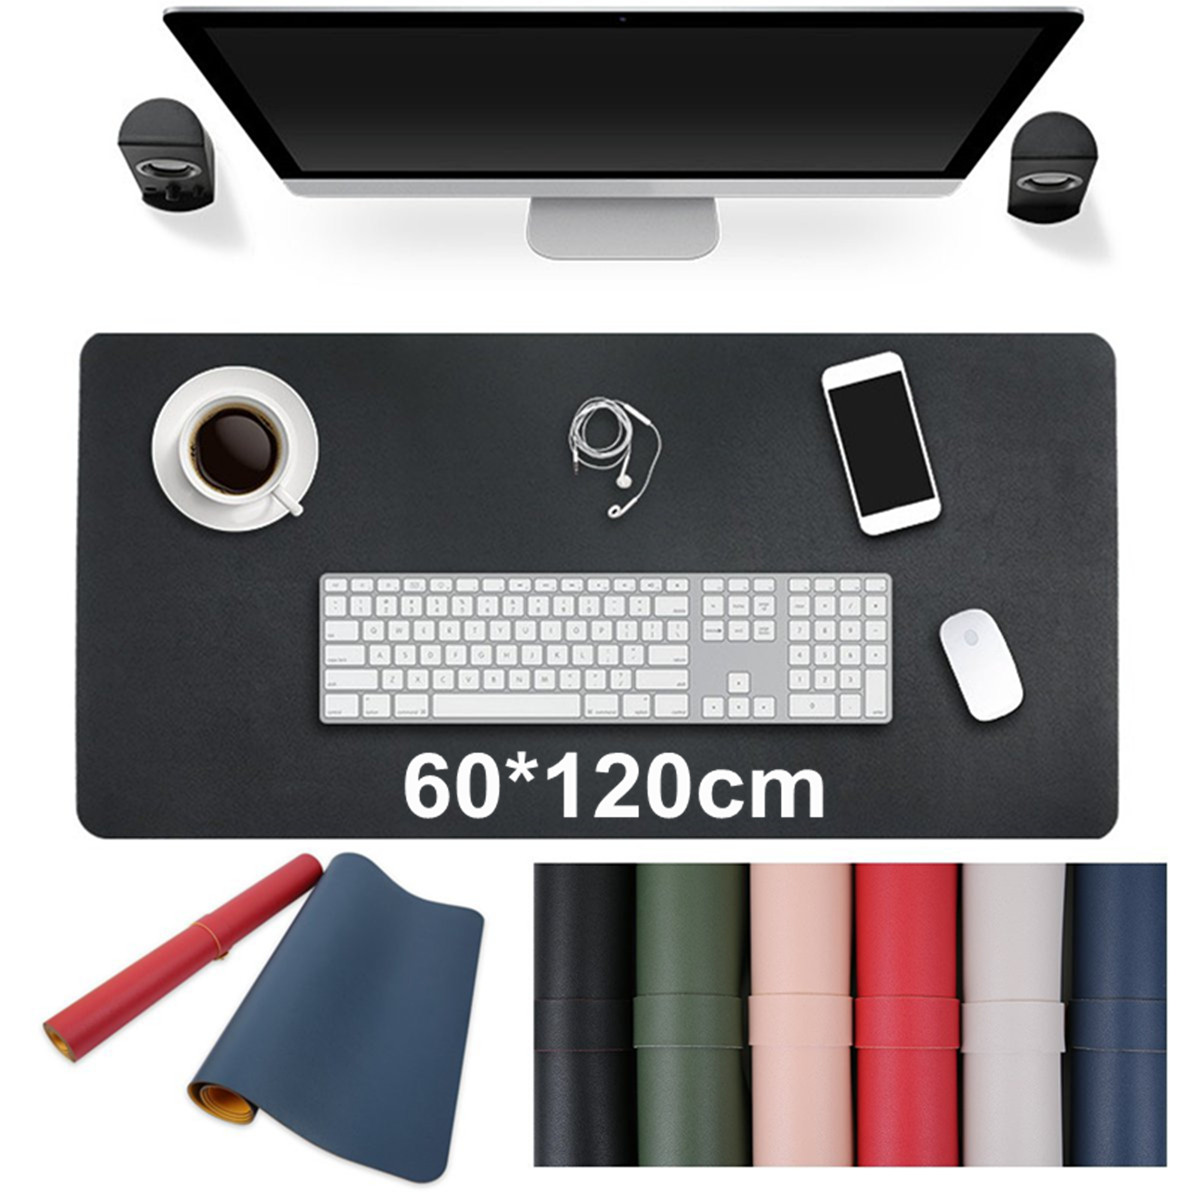 120x60cm Both Sides Two Colors PU leather Mouse Pad Mat Large Office Gaming Desk Mat 7